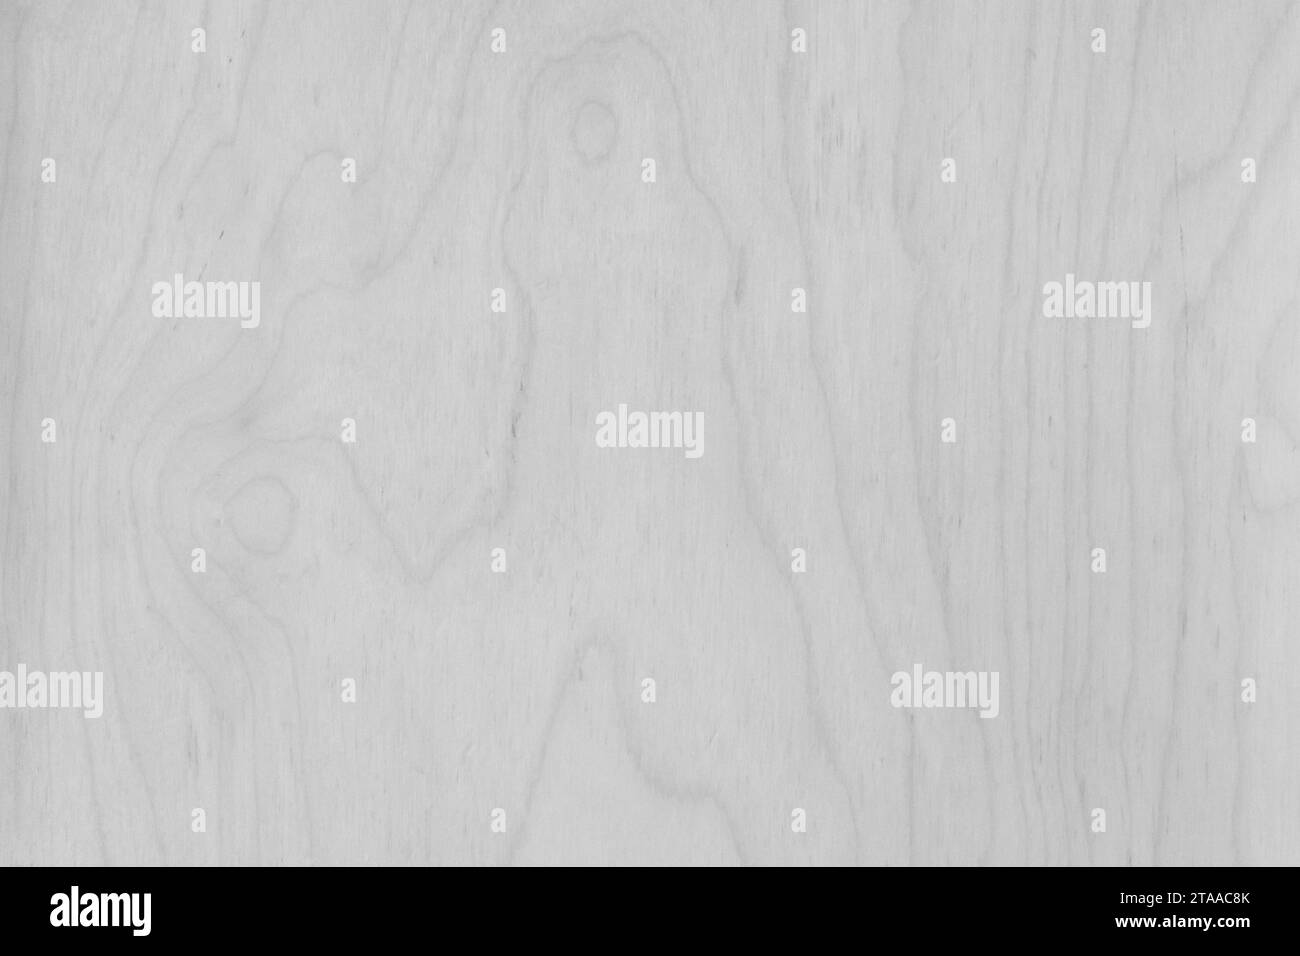 Light White Smooth Surface With Abstract Natural Wood Pattern Texture Boards Background Wooden. Stock Photo